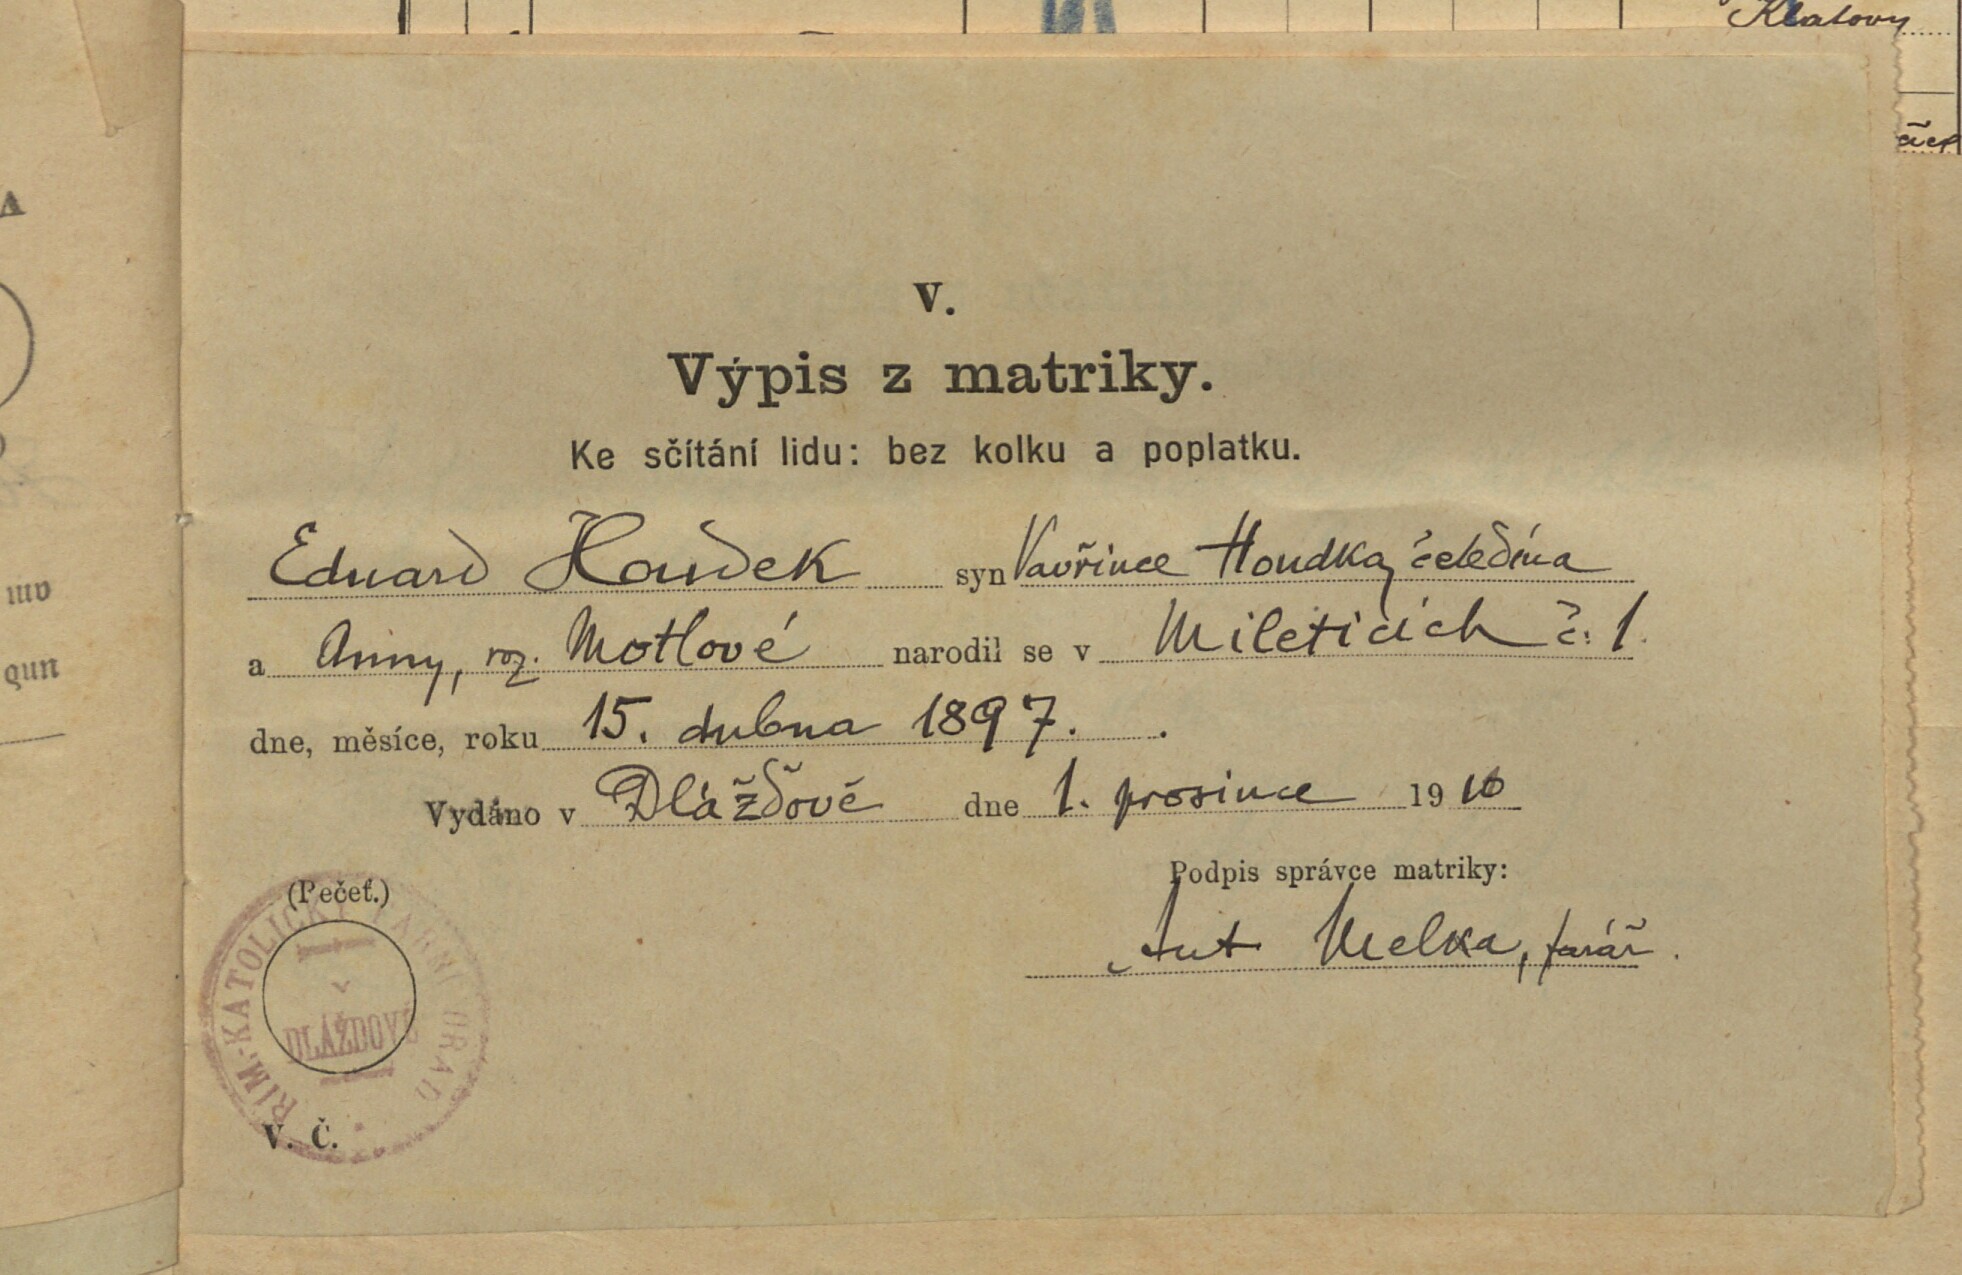 16. soap-kt_01159_census-1910-zahorcice-opalka-cp001_0160